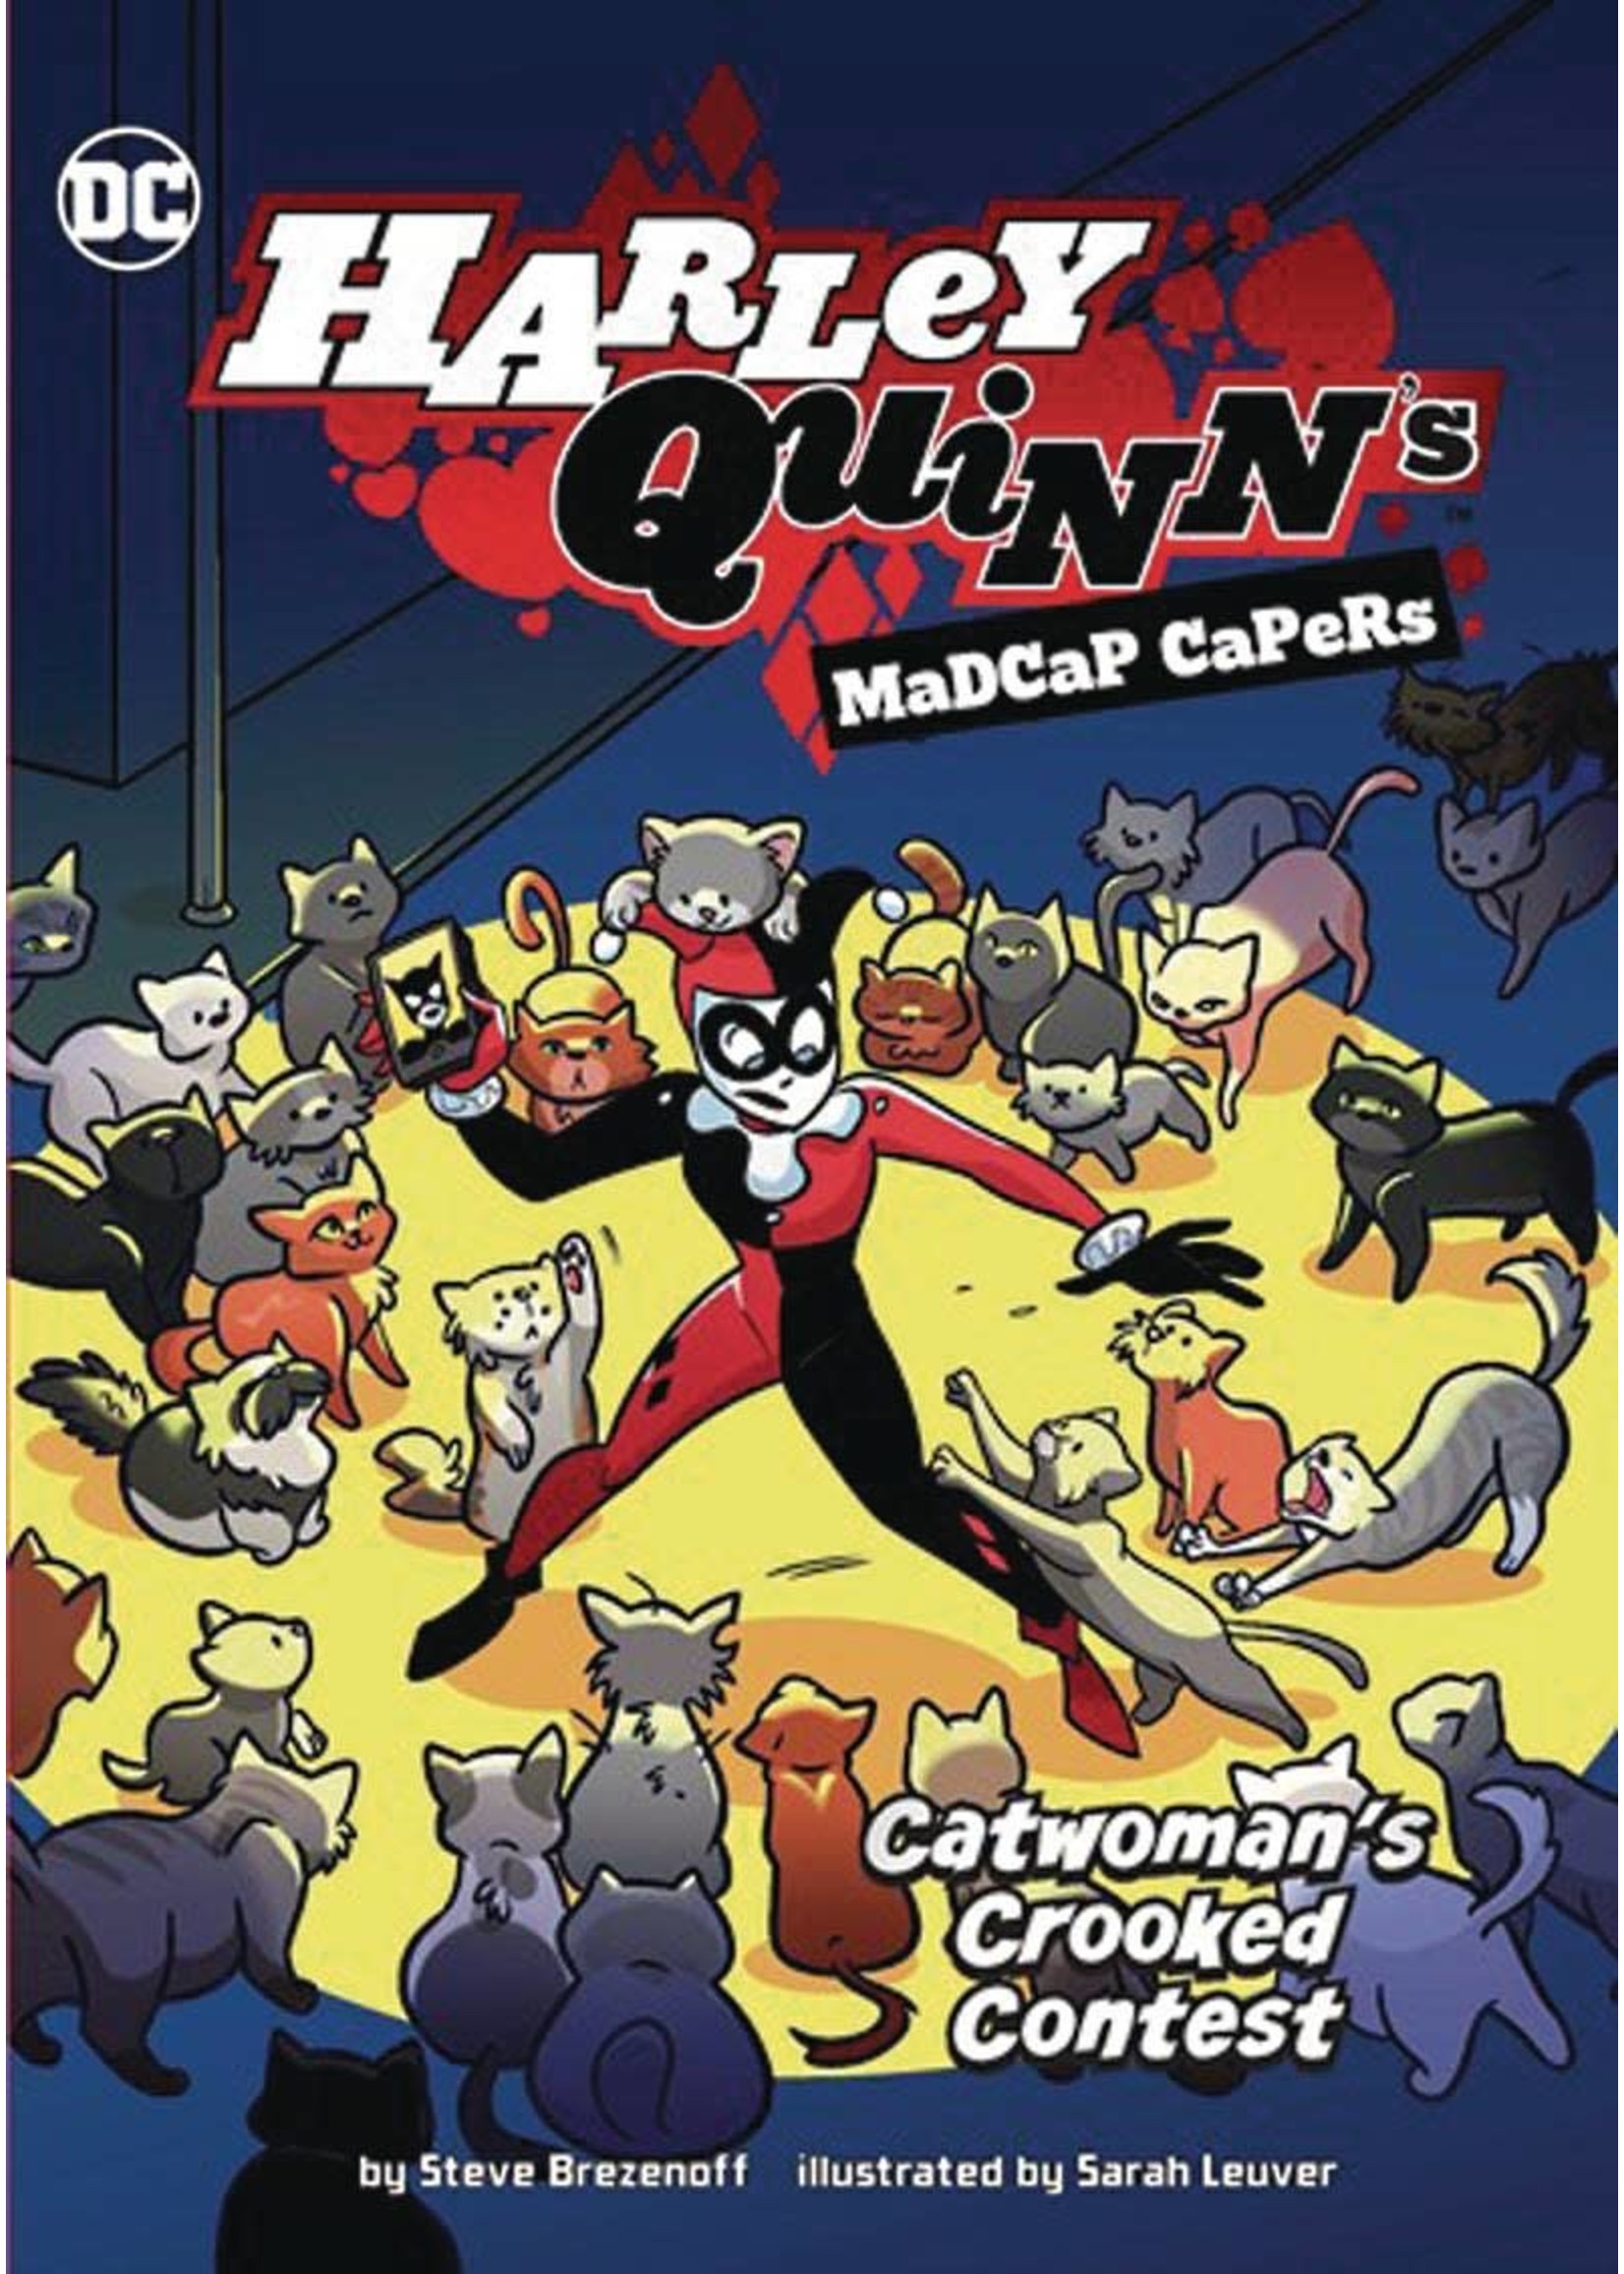 DC COMICS HARLEY QUINN MADCAP CAPERS CATWOMANS CROOKED CONTEST